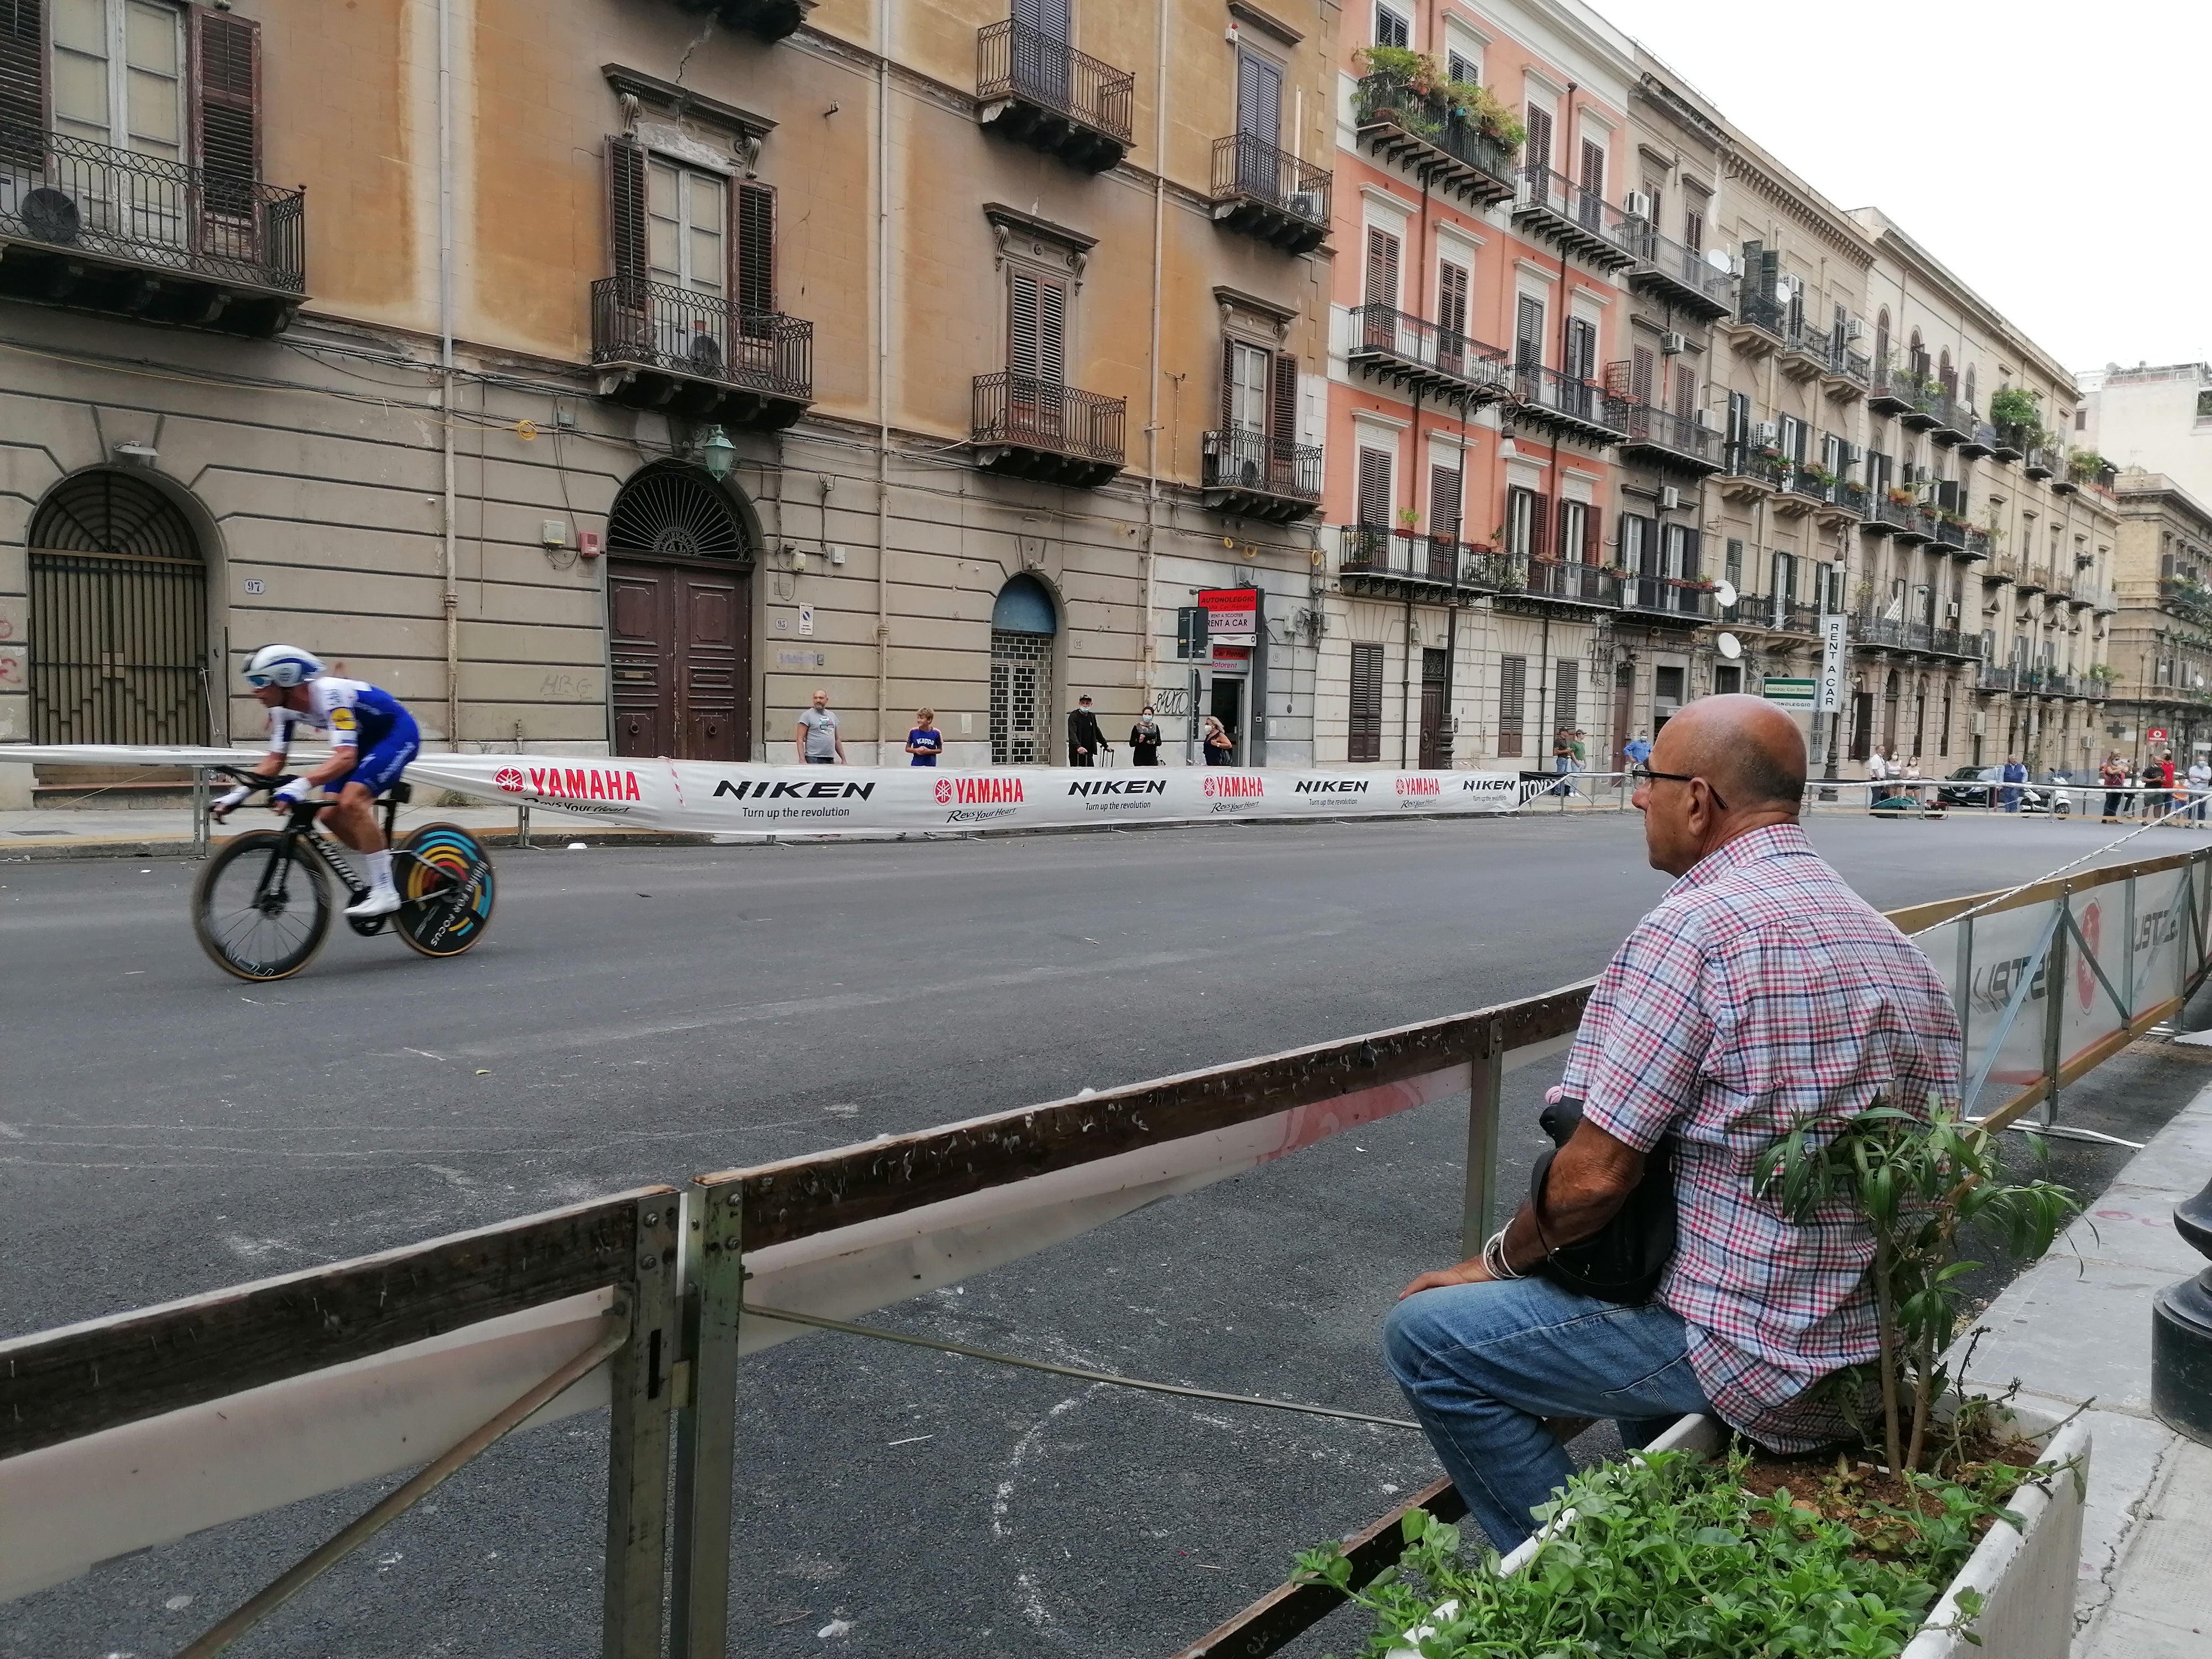 A man sits and watches the riders roar past on Stage 1 of the Giro d’Italia 2020